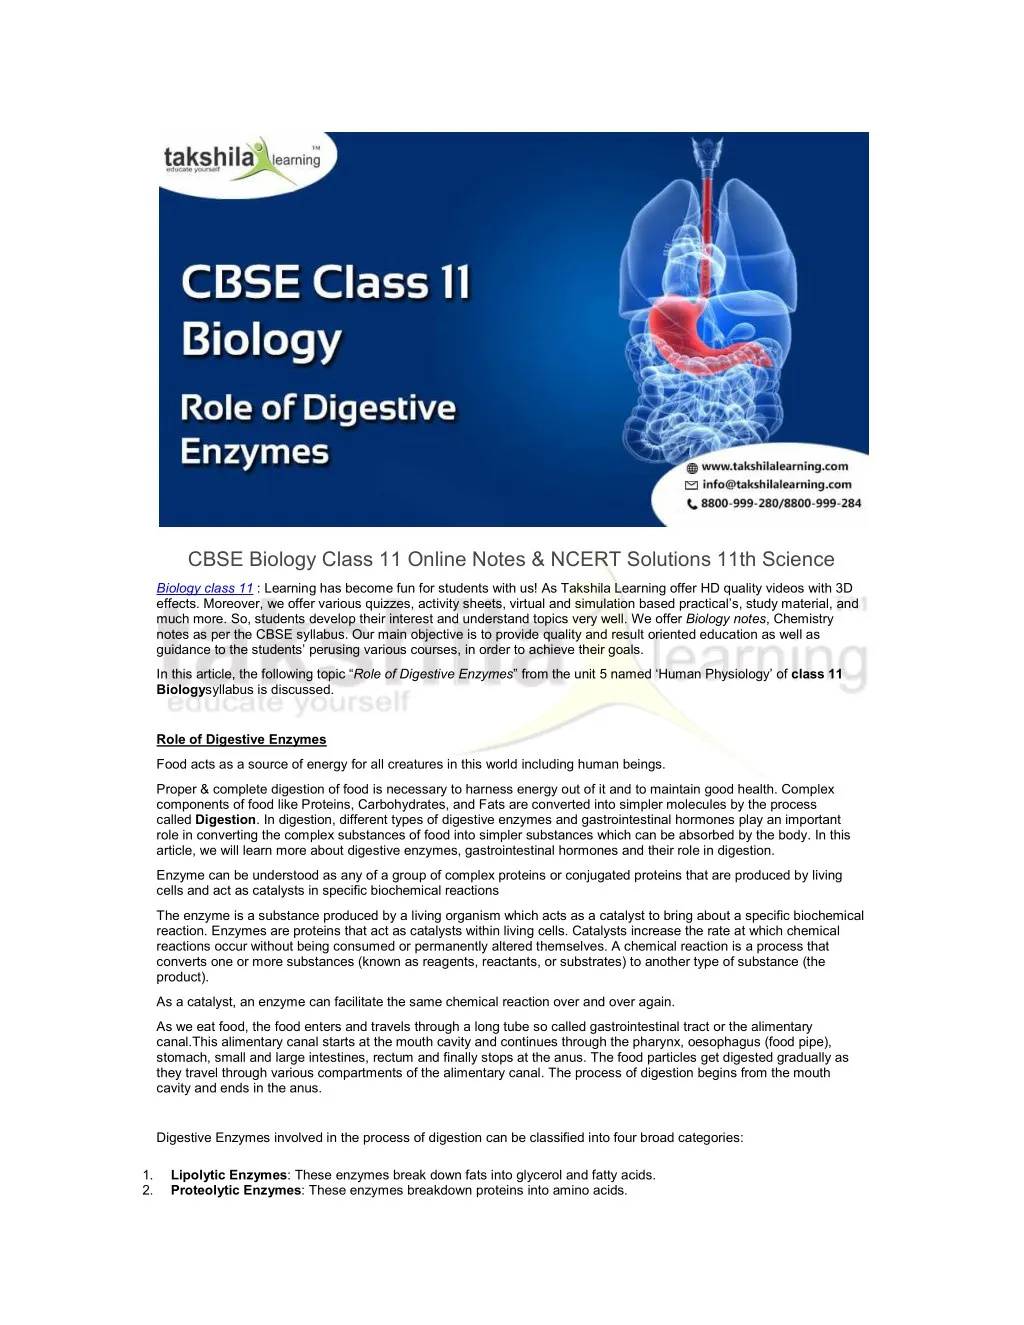 PPT - CBSE Biology class 11 online notes & NCERT Solutions 11th science PowerPoint Presentation ...